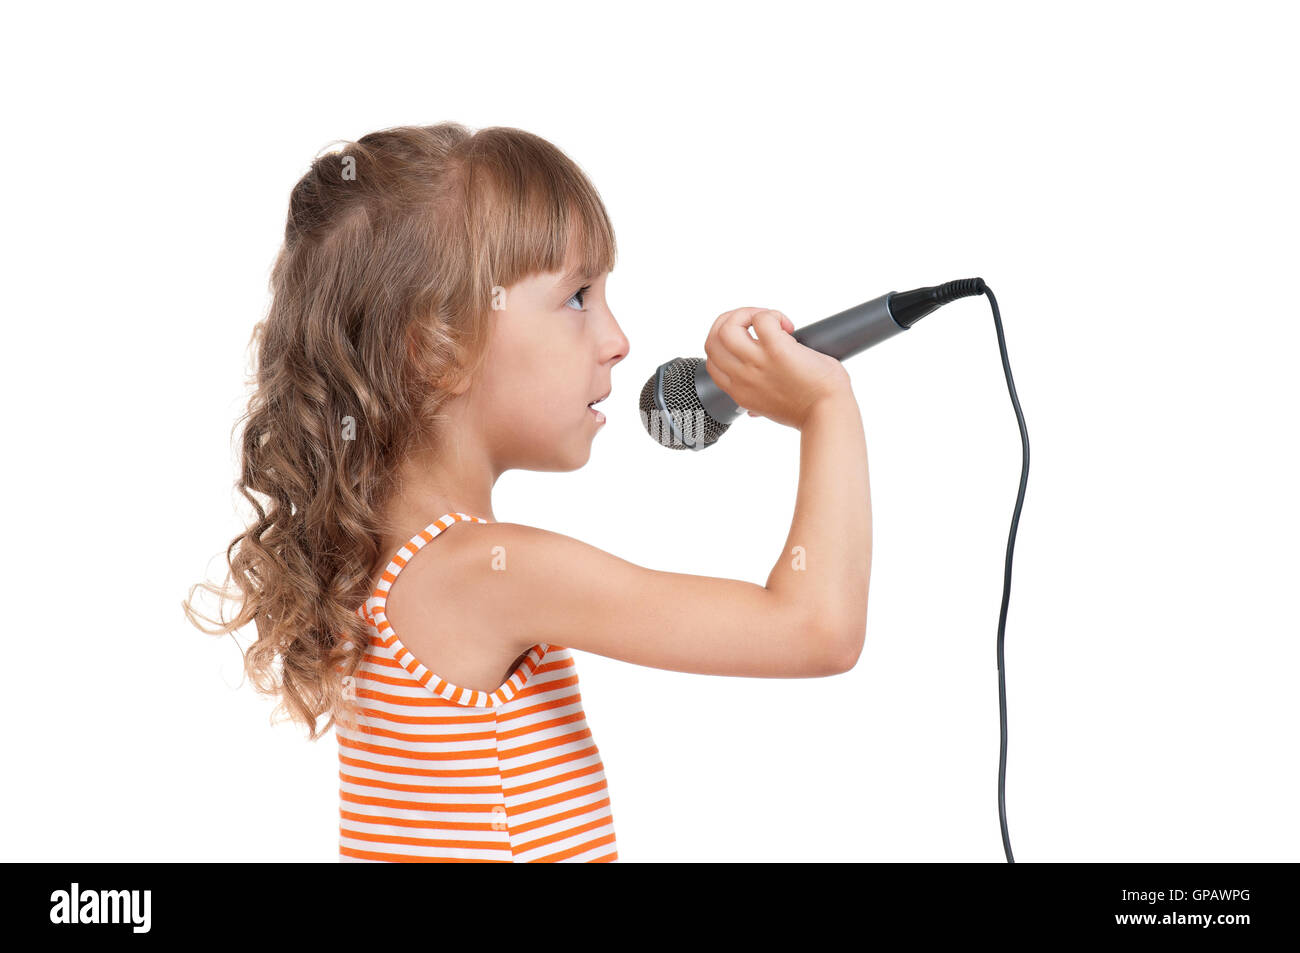 Child with microphone Stock Photo